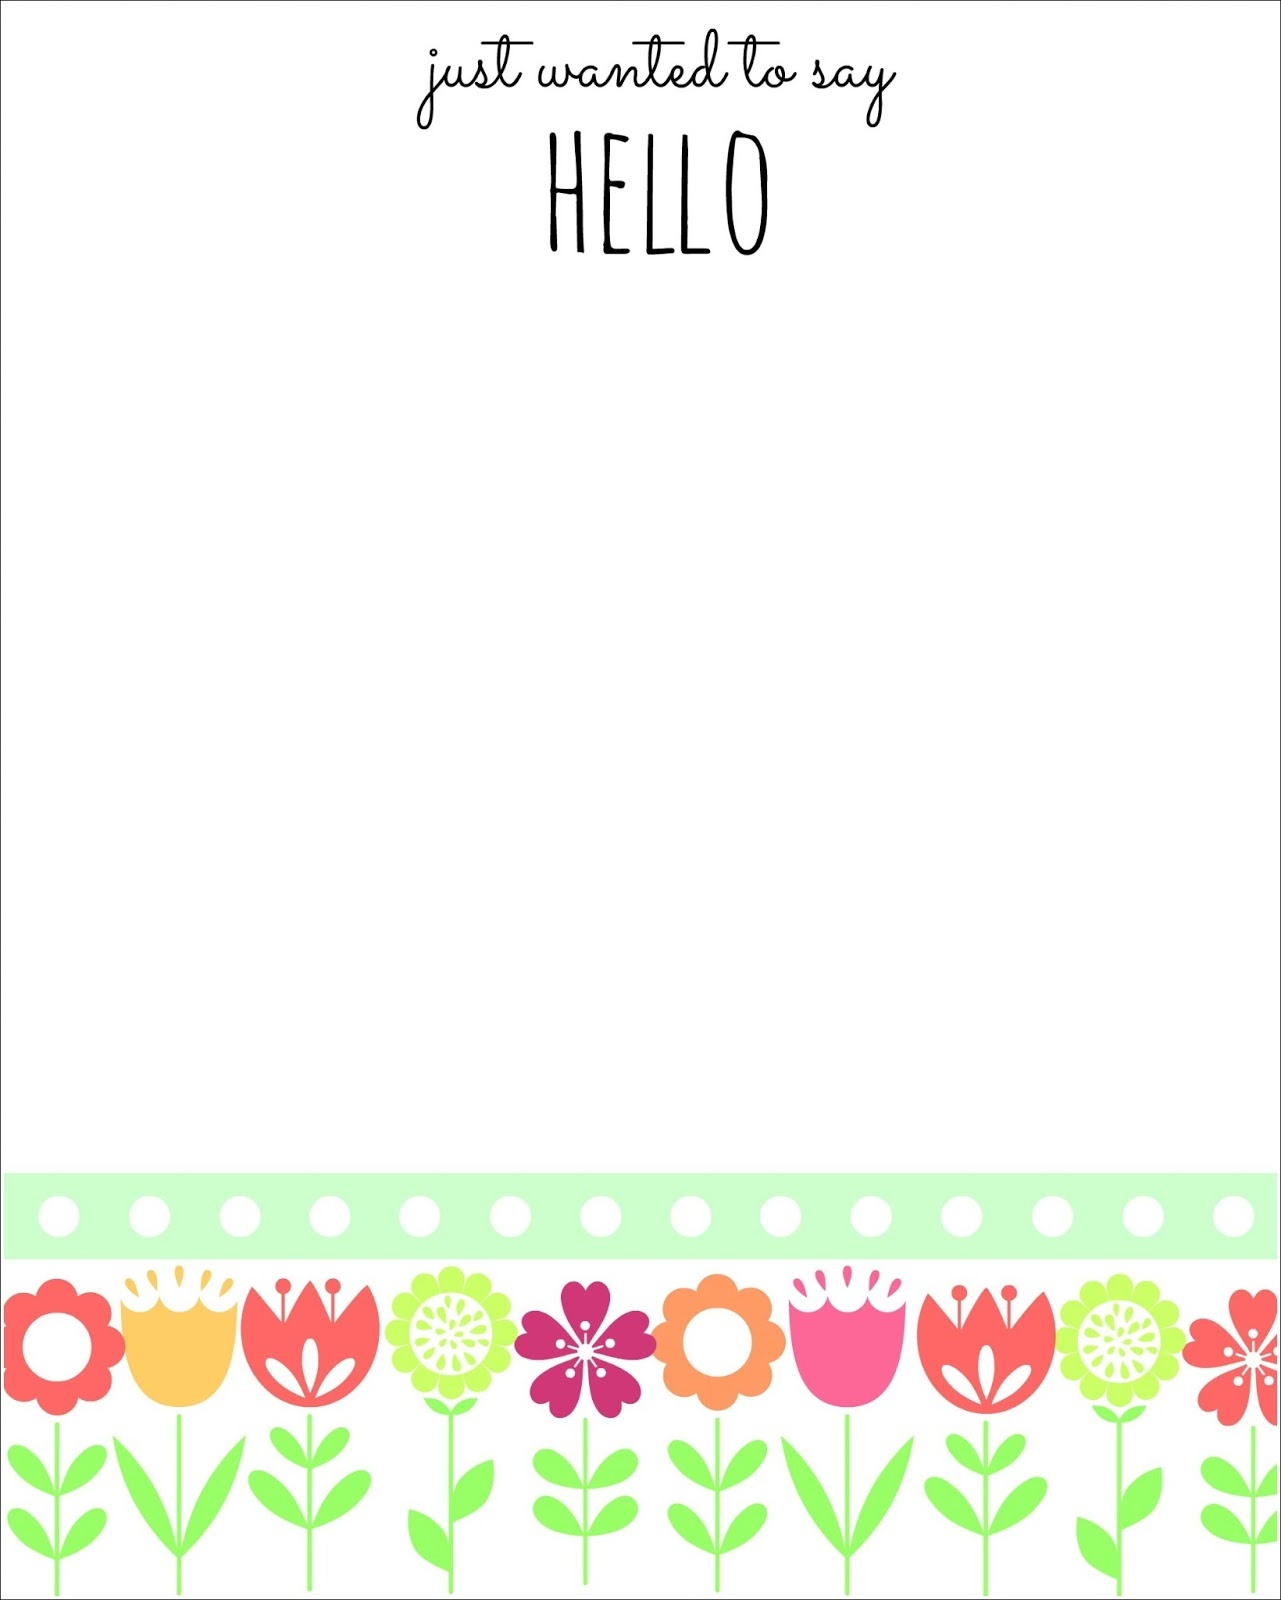 Free Printables For Spring And Some Stationary Too! - Mom 4 Real - Free Printable Spring Stationery